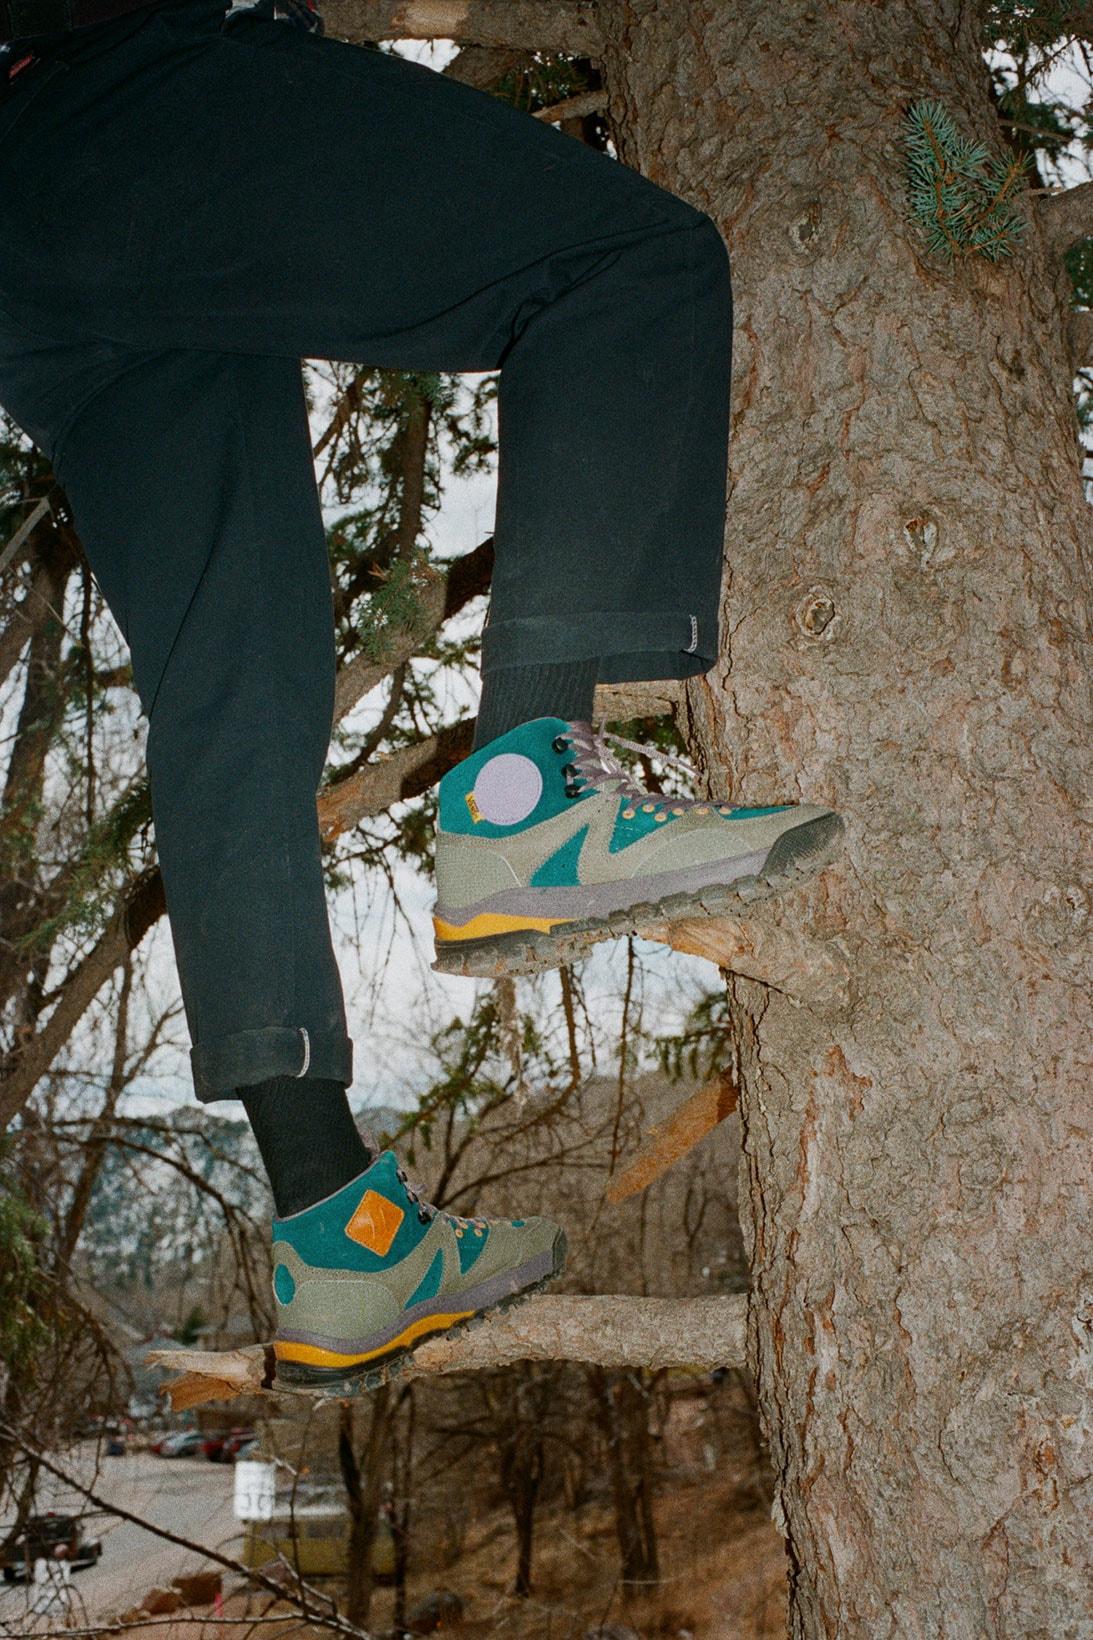 Vault by Vans AMZN TRL V3 LX Hiking Boots Shoes Taka Hayashi Tree On Foot Teal Turquoise